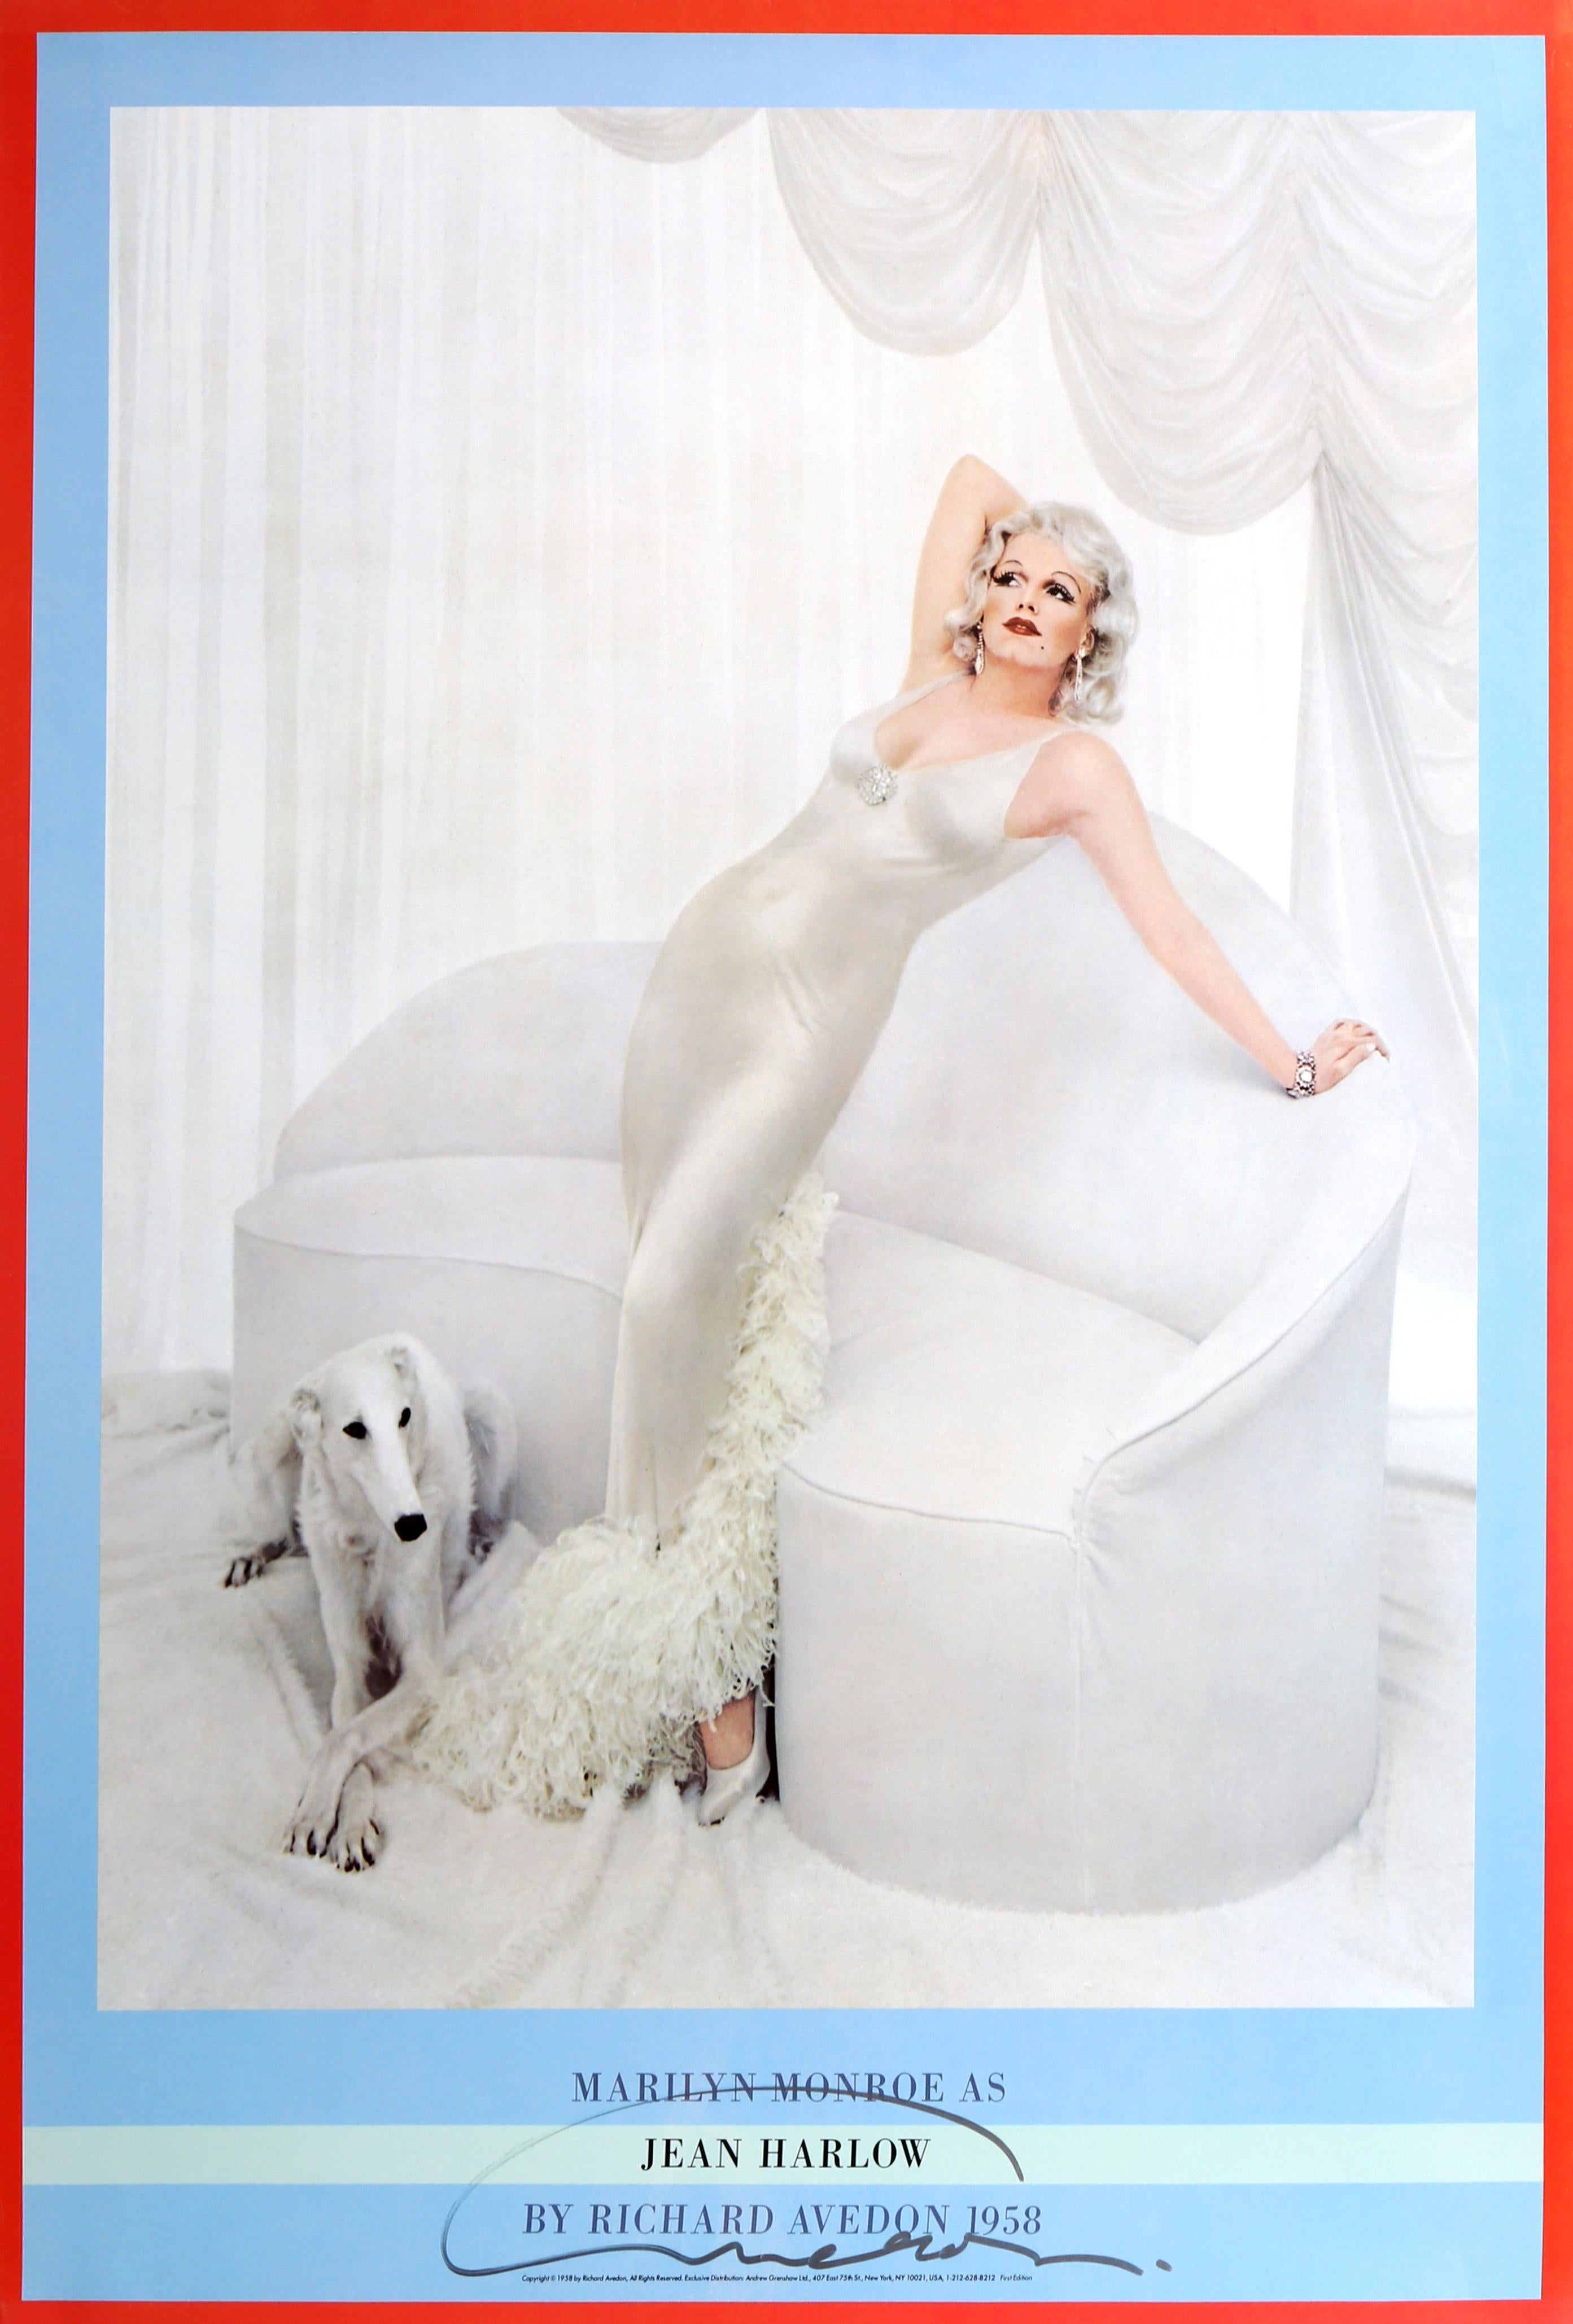 Marilyn Monroe as Jean Harlow , Poster signed by Richard Avedon